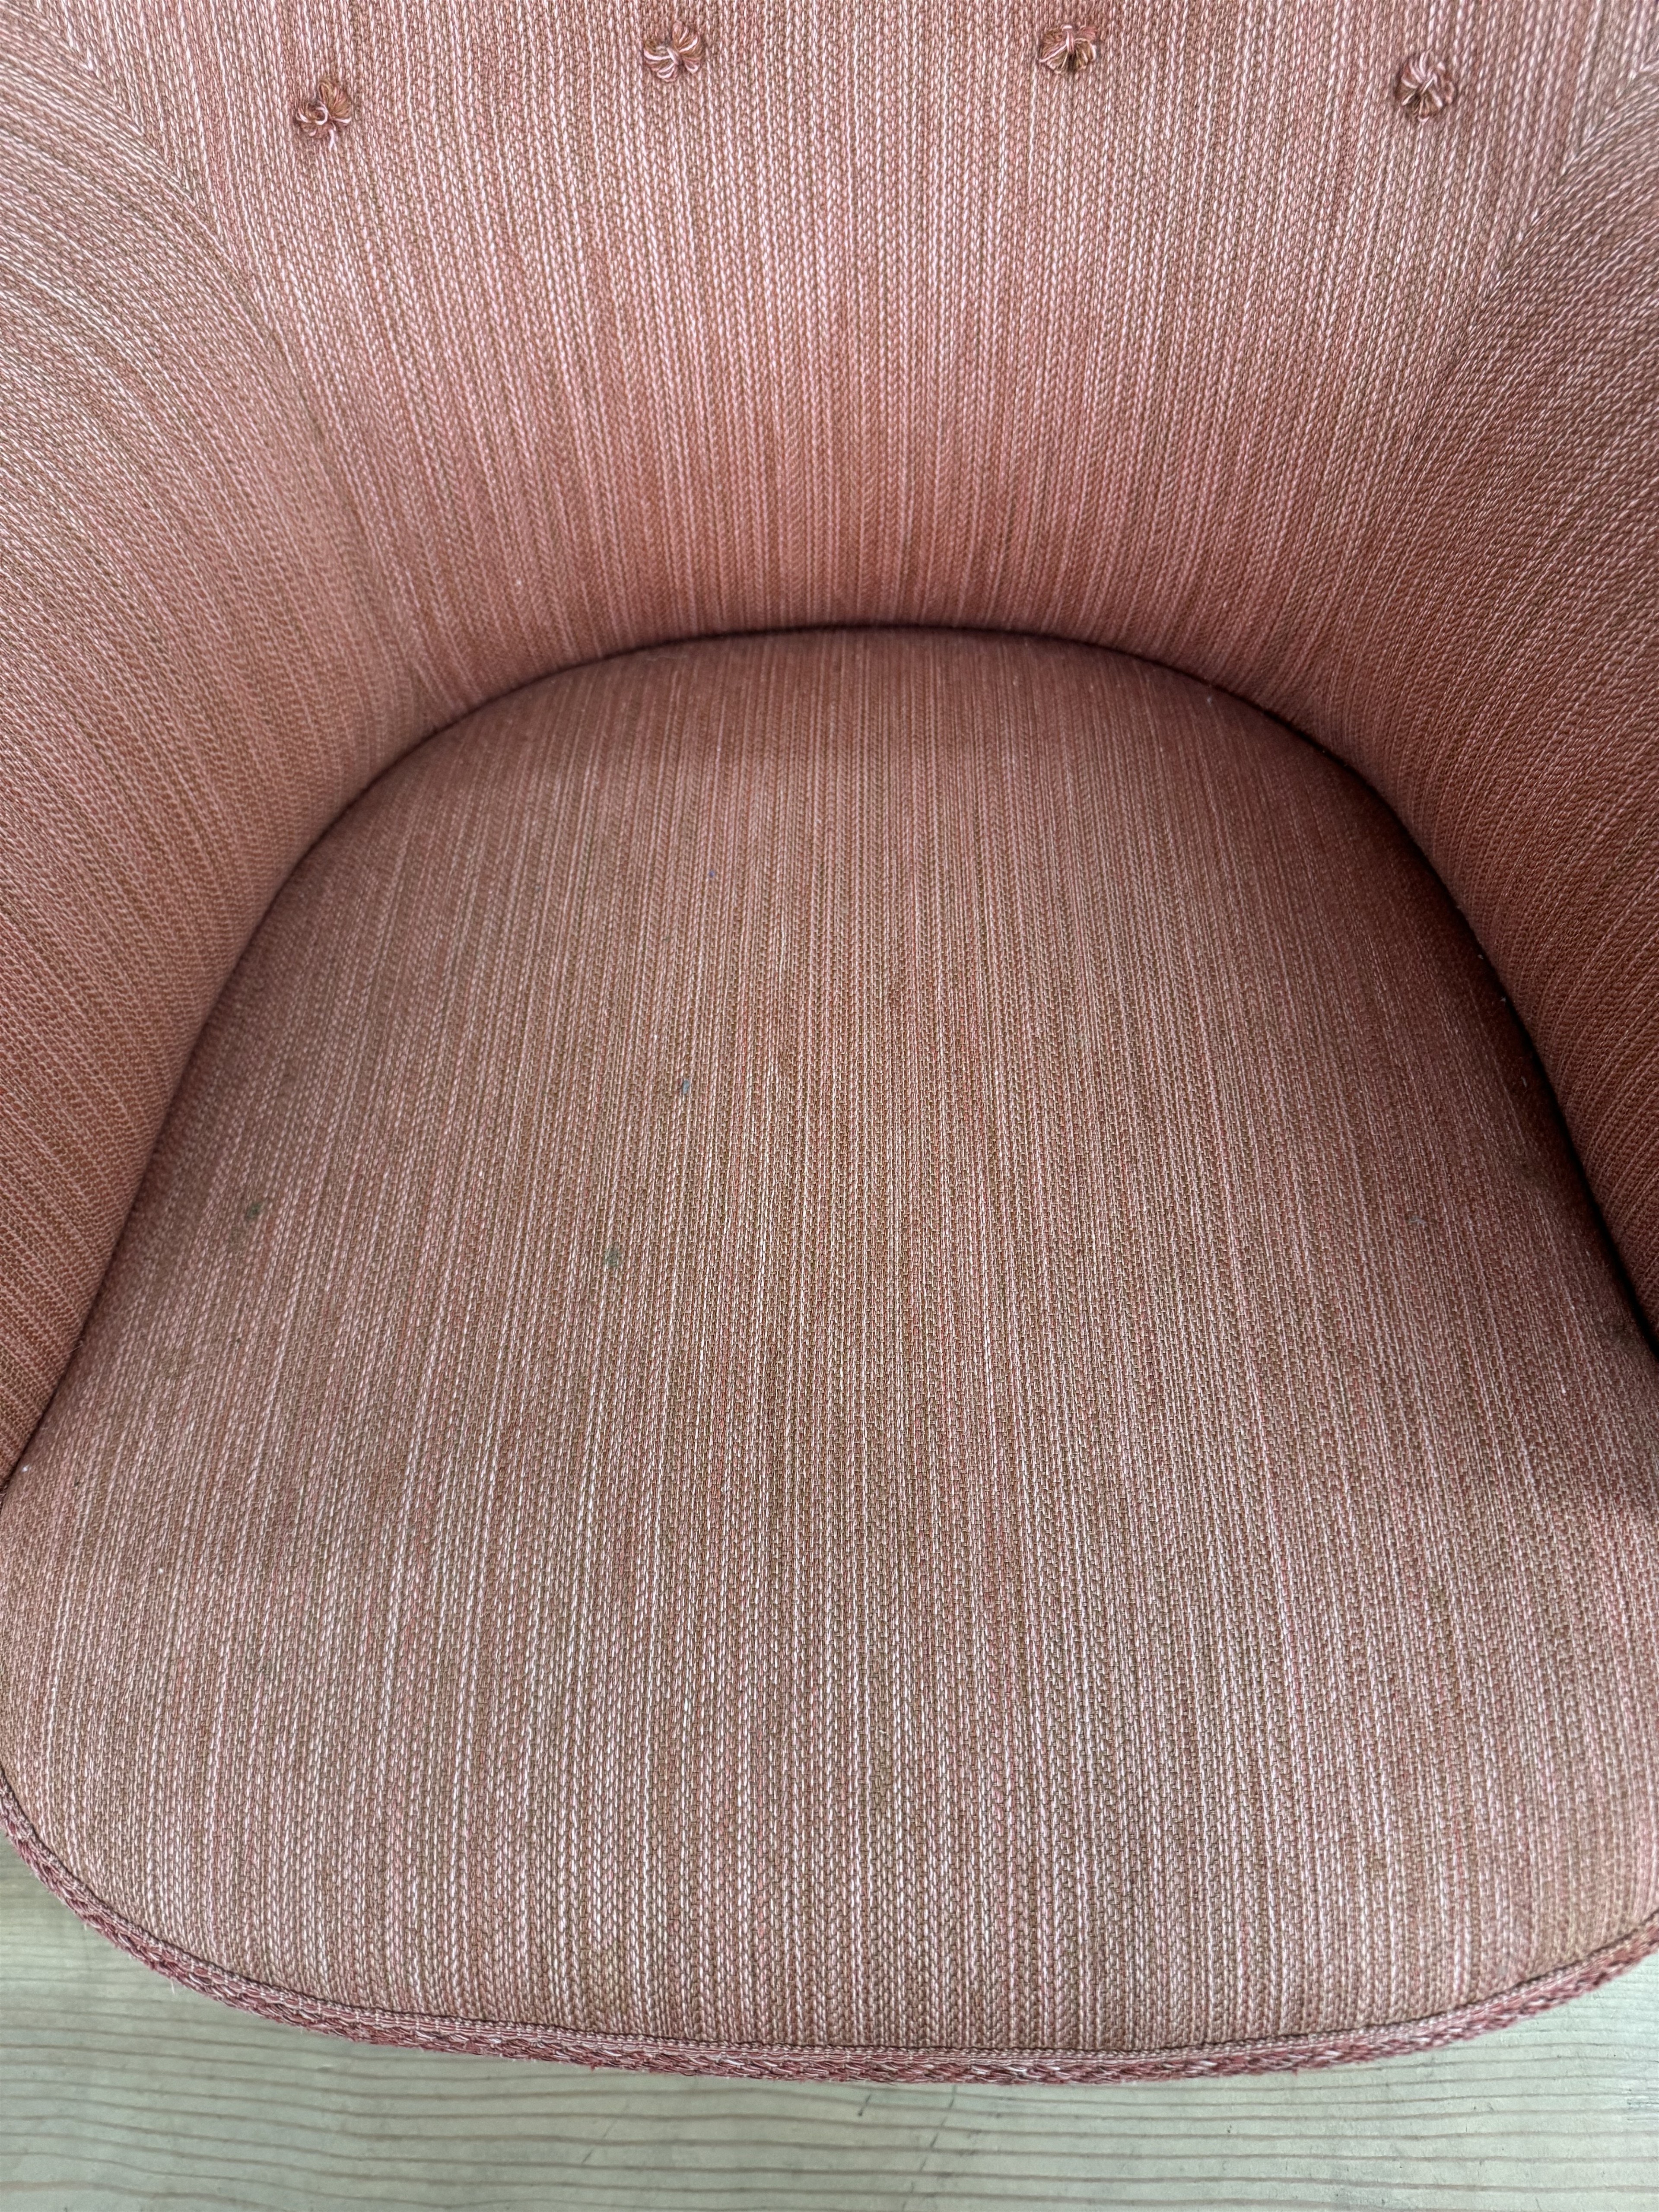 a close up of a pink chair on a wooden floor